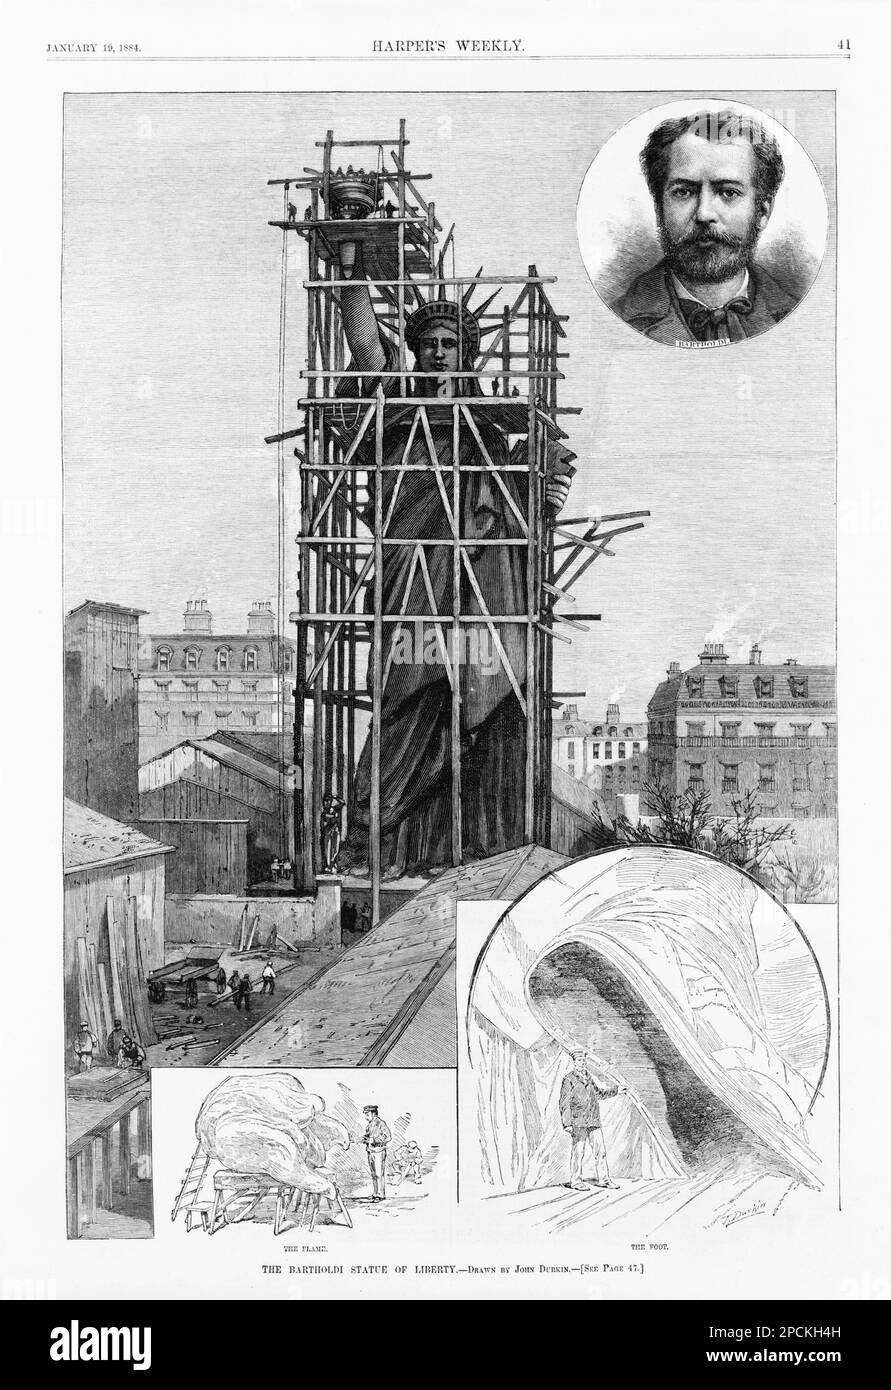 1884,  New York , USA  : The french architect and sculptor artist  FREDERIC AUGUSTE BARTHOLDI (Colmar, Alsace 1834 - 1904 ). The Bartholdi's Statue of Liberty making in Paris , France , engraving from HARPER'S WEEKLY ( 1884 June 16 ).  Bartholdi was a French sculptor who originally studied painting under Ari Scheffer. his major scupltures include 'Switzerland Succoring Strabourg', at Basel, Switzerland, statues at Colmar, at Clermont-Ferrand, at Belfort, in Paris, and at Union Square in New York. He is said to have been a Freemason. The face of the Statue of Liberty is said to be that of his m Stock Photo